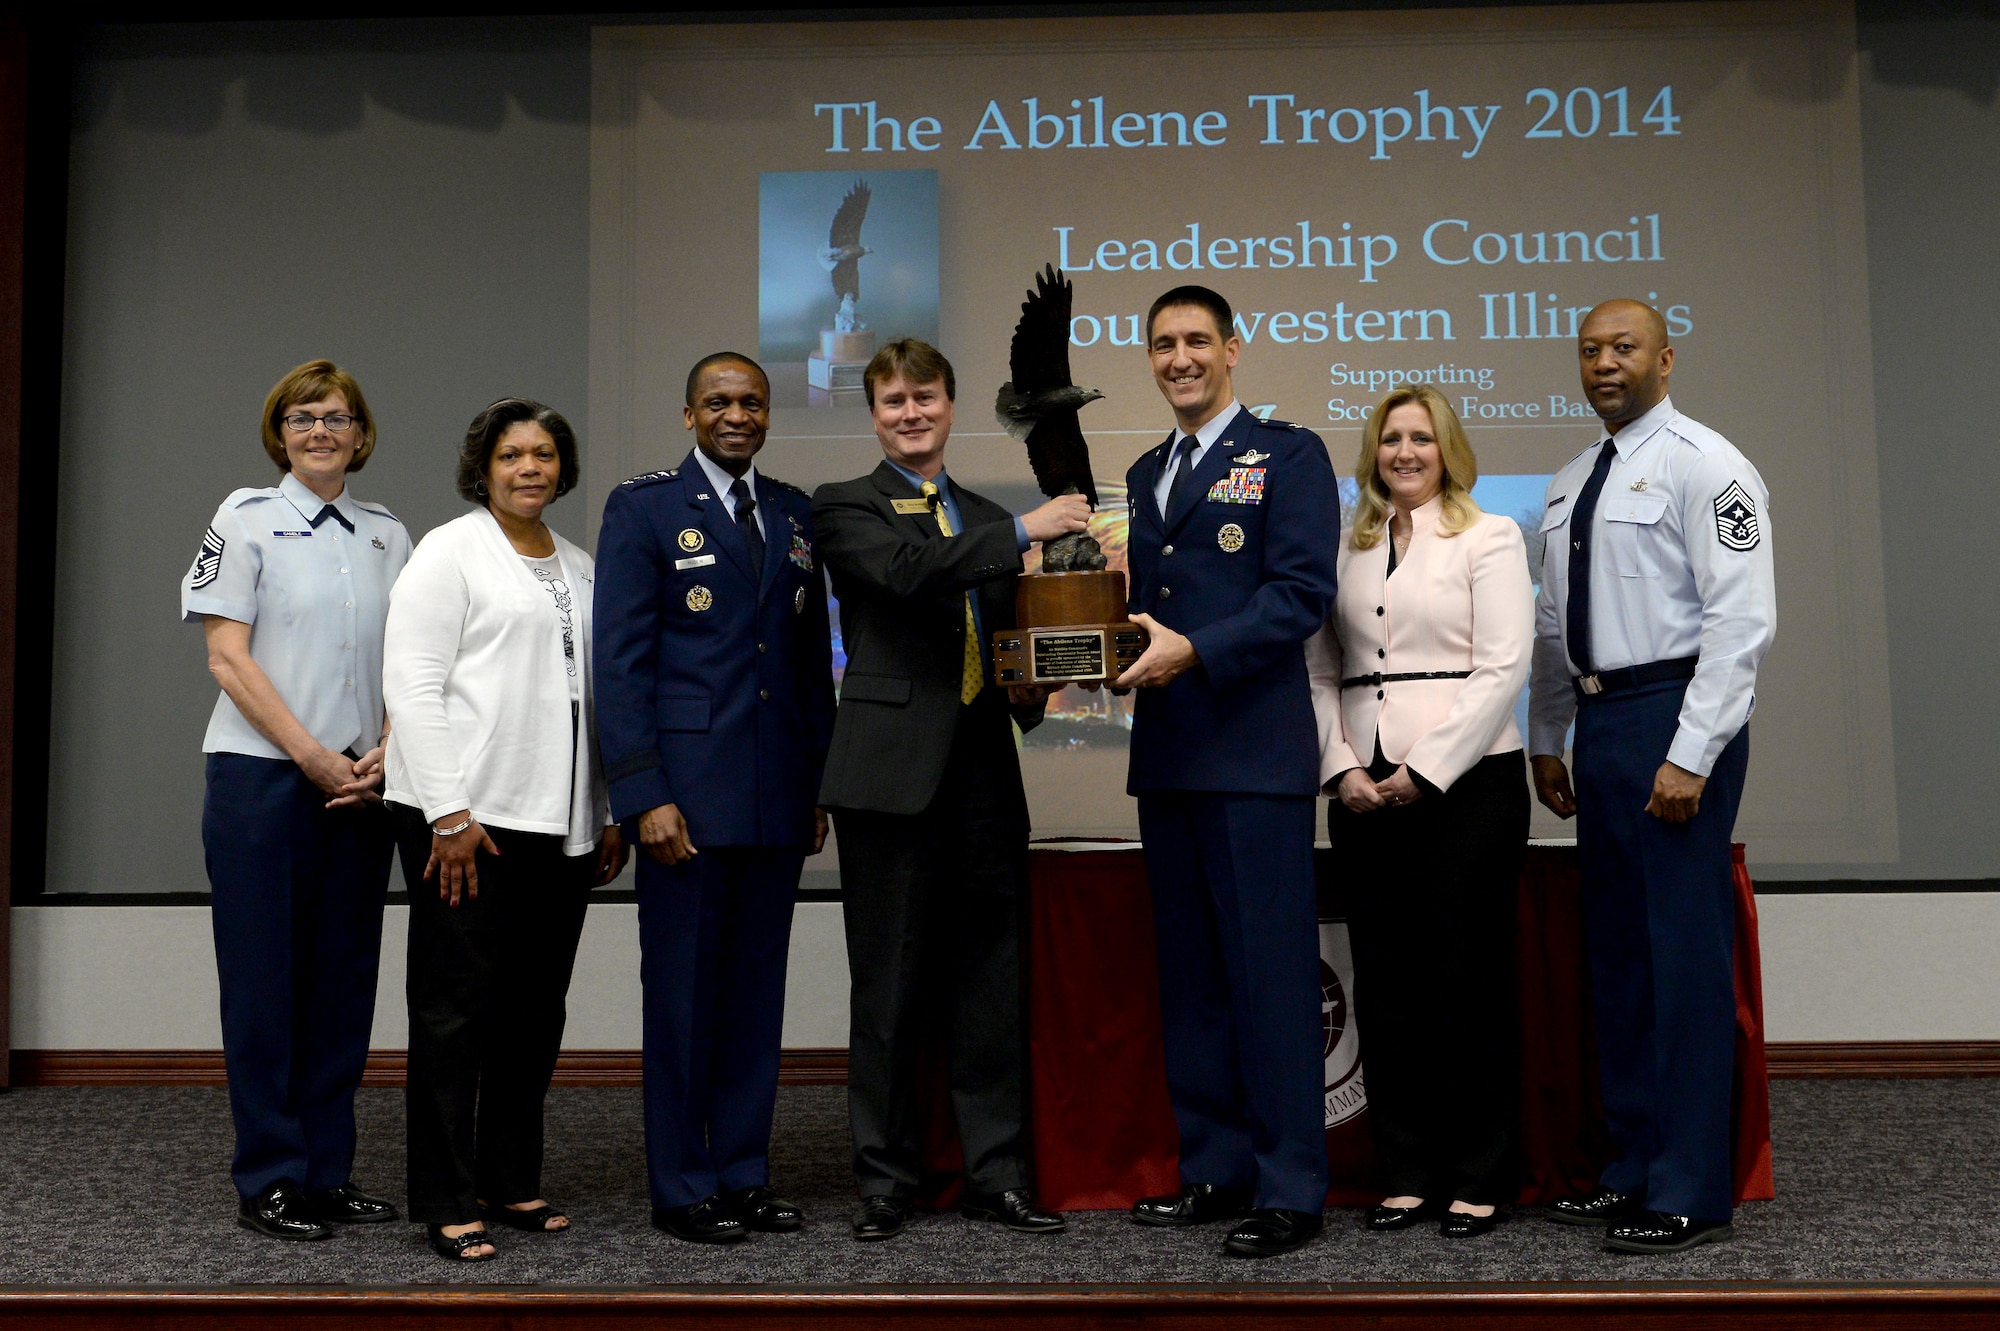 The Southwestern Illinois area was presented the coveted Abilene Trophy April 17 for the second time in the last three years in recognition of the extensive support demonstrated during 2014 for Scott Air Force Base’s military members and their families. Left to Right: Air Mobility Command Command Chief CMSgt Victoria Gamble, Mrs. Evelyn McDew, Air Mobility Command Commander Gen. Darren McDew, Chair of the Military Affairs Committee for the Abilene Chamber Gray Bridwell, Installation Commander and Commander 375th Air Mobility Wing Col. Kyle Kremer, Mrs. Deb Kremer, and 375th Air Mobility Wing Command Chief CMSgt Wes Mathias. (U.S. Air Force photo Senior Airman Tristin English)